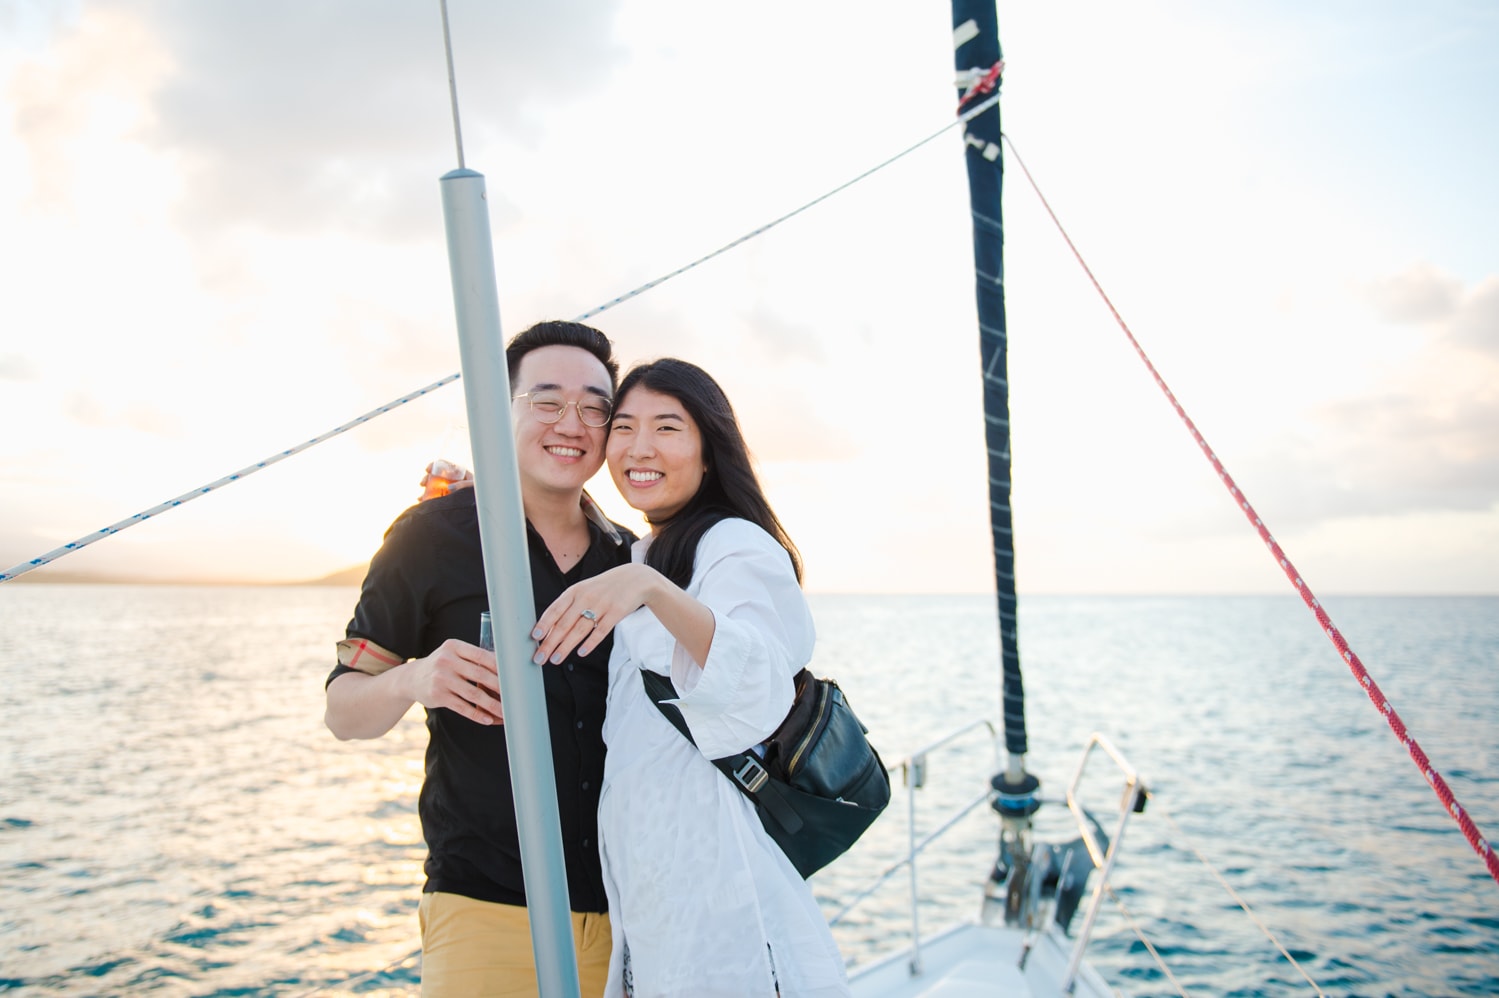 marriage proposal photos at a sailboat tour to Icacos Island by Puerto Rico wedding photographer Camille Fontz